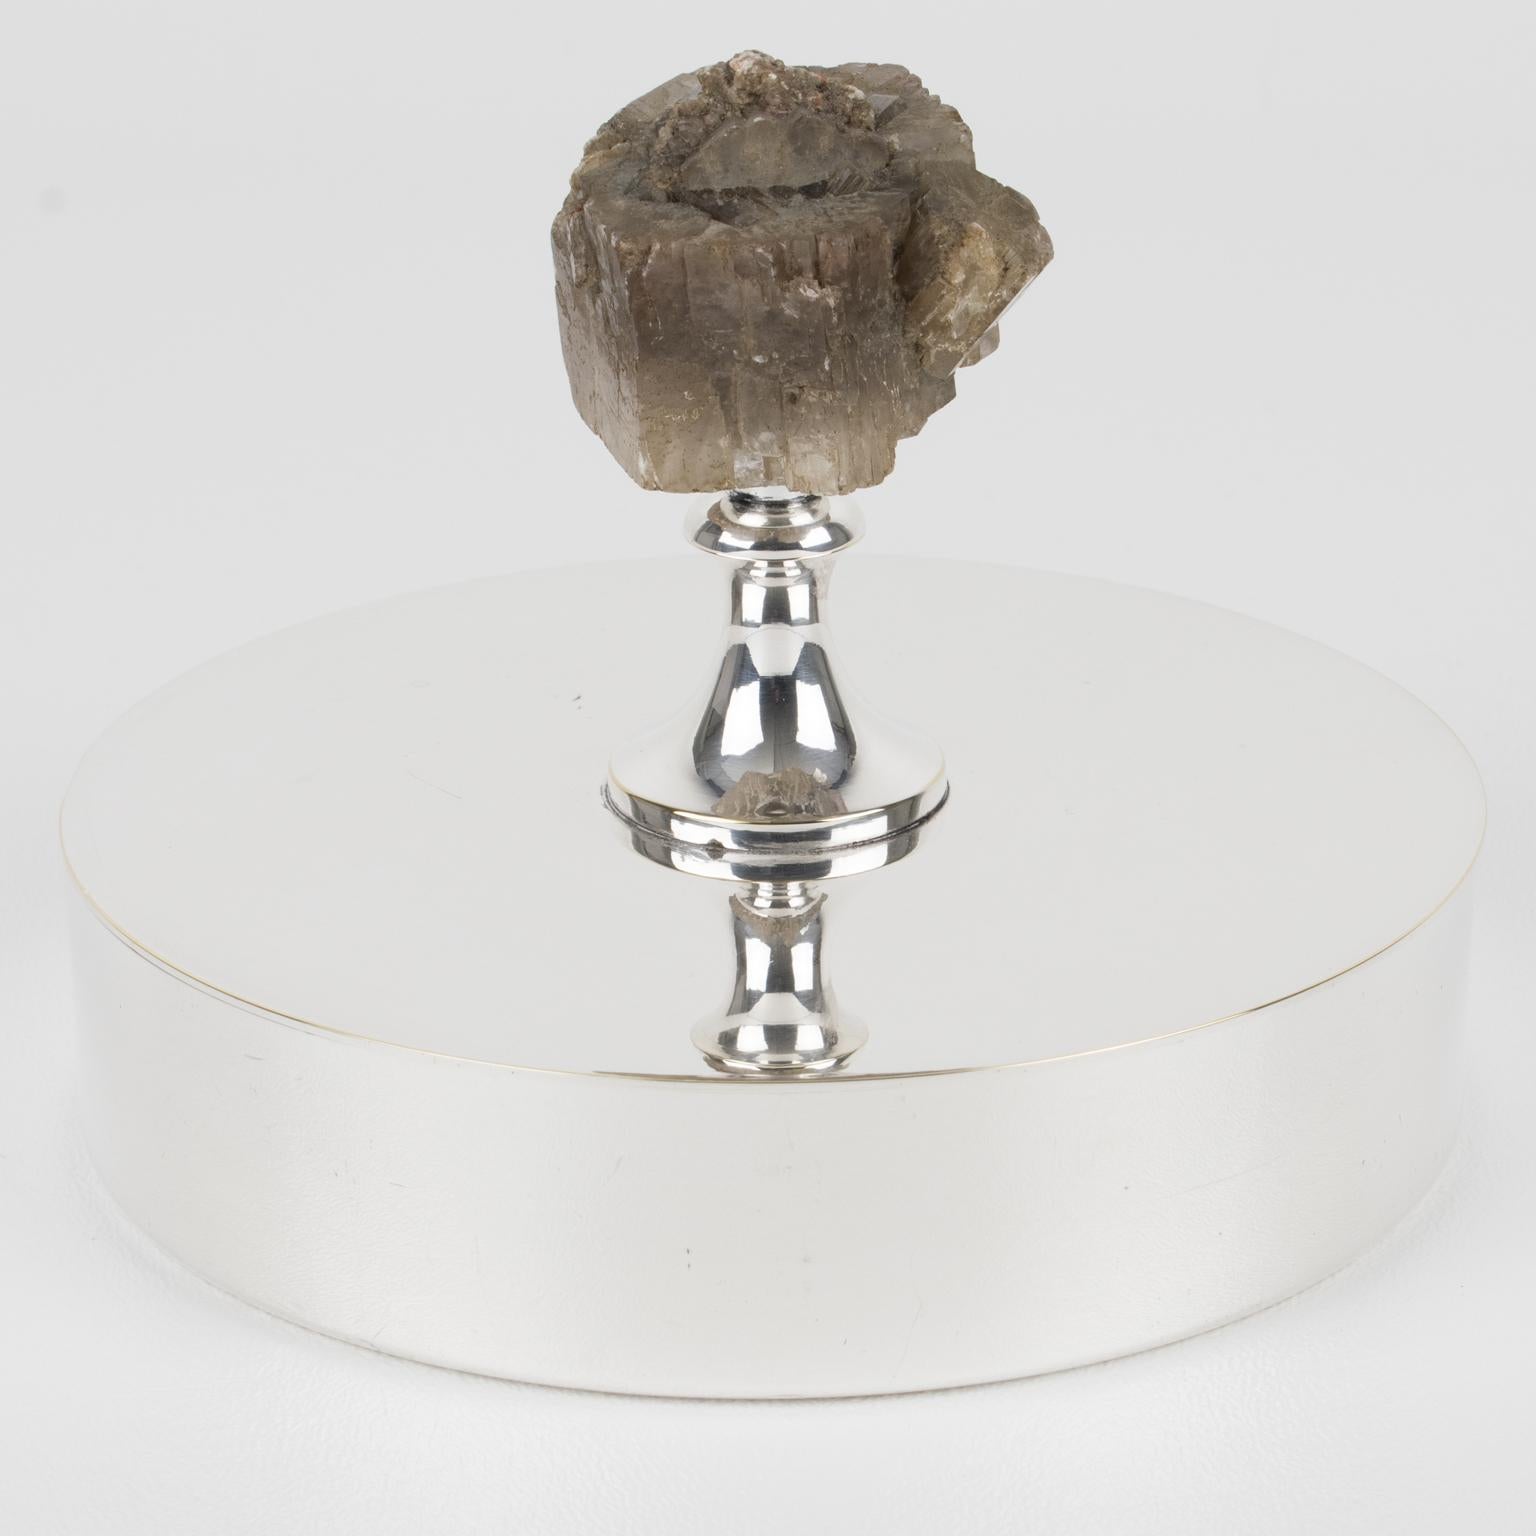 This beautiful modernist silver plate decorative box was crafted in France for the renowned Christian Dior House for his Home Collection. The piece features an elegant minimalist round shape with a lid ornate with a large quartz stone as the finial.